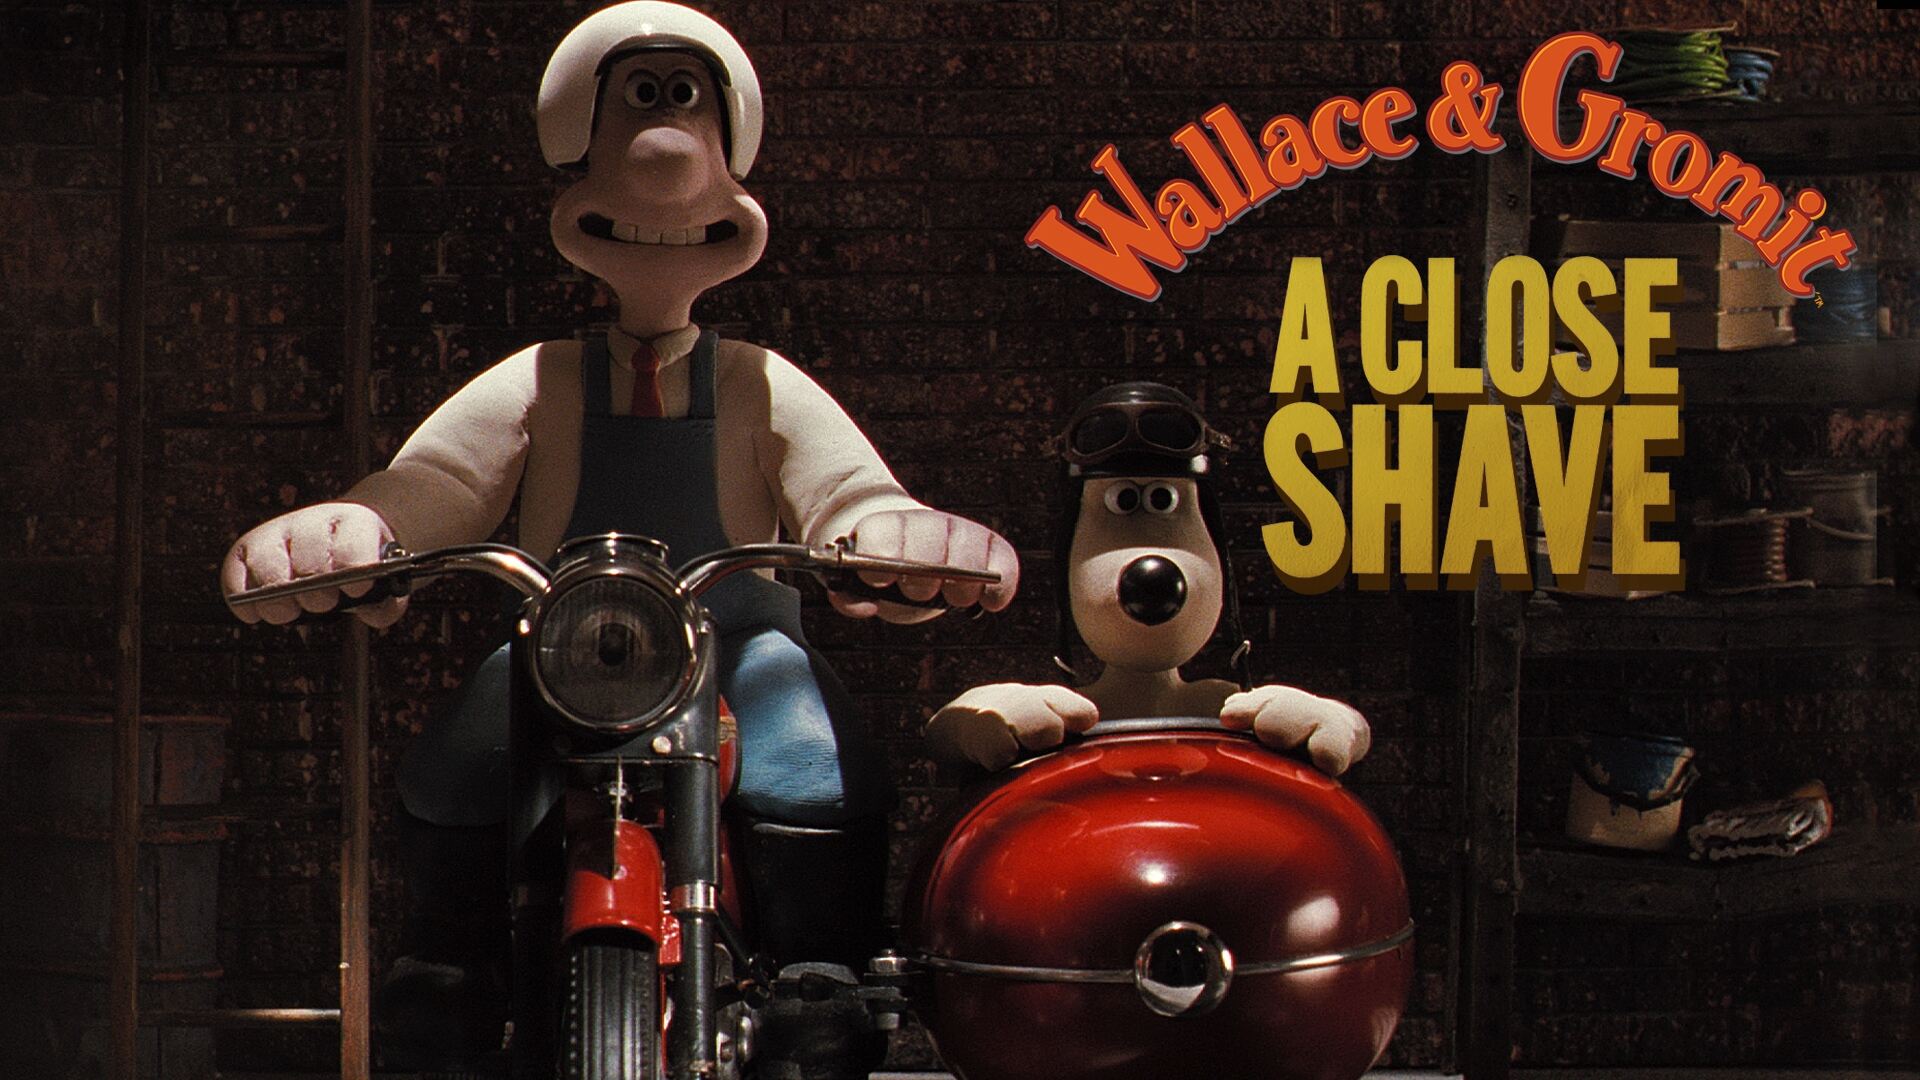 43-facts-about-the-movie-wallace-gromit-in-a-close-shave